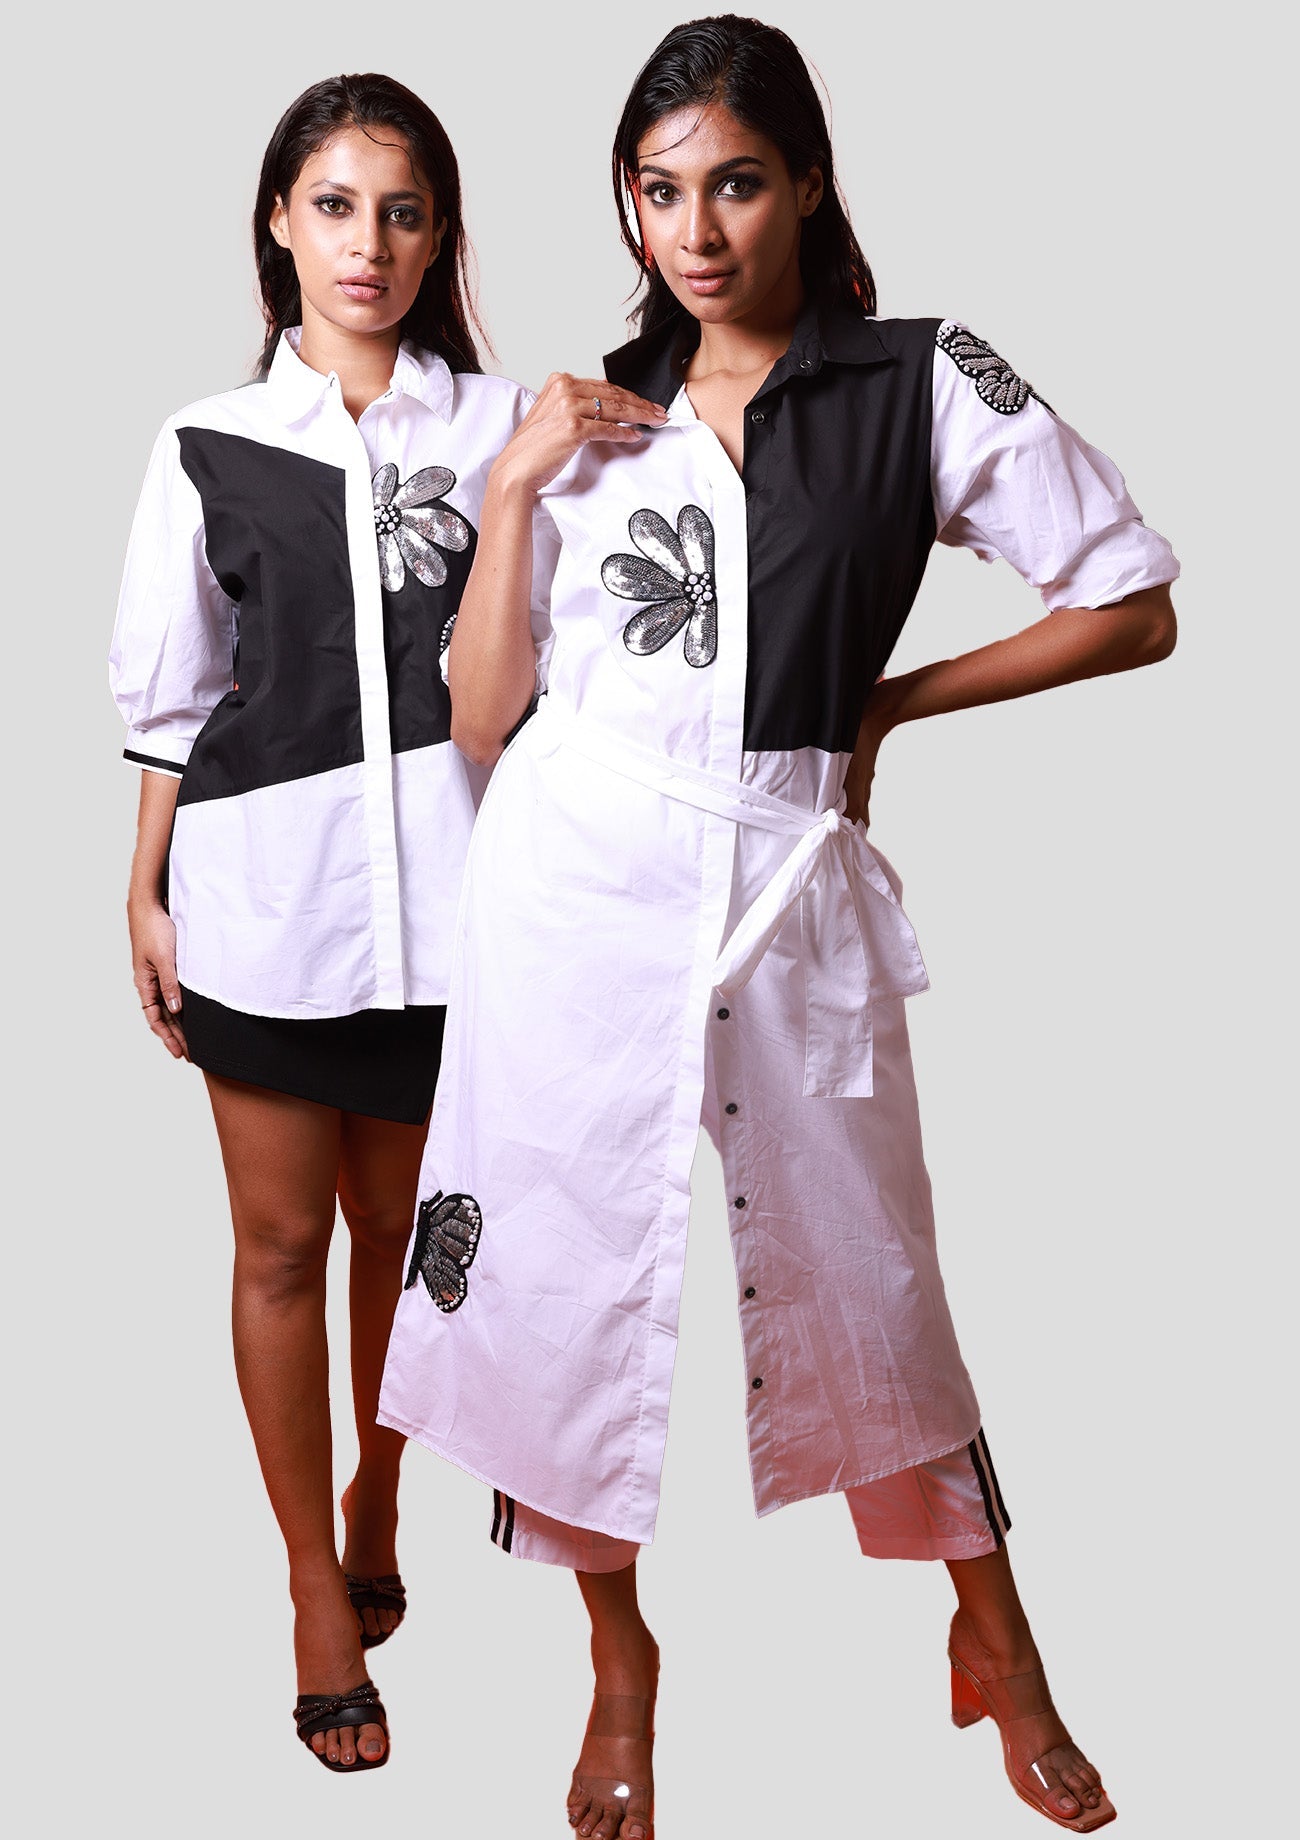 White Cotton Shirt With Black Back, Black Triangular Block With Silver Flower & Butterfly Embroidery